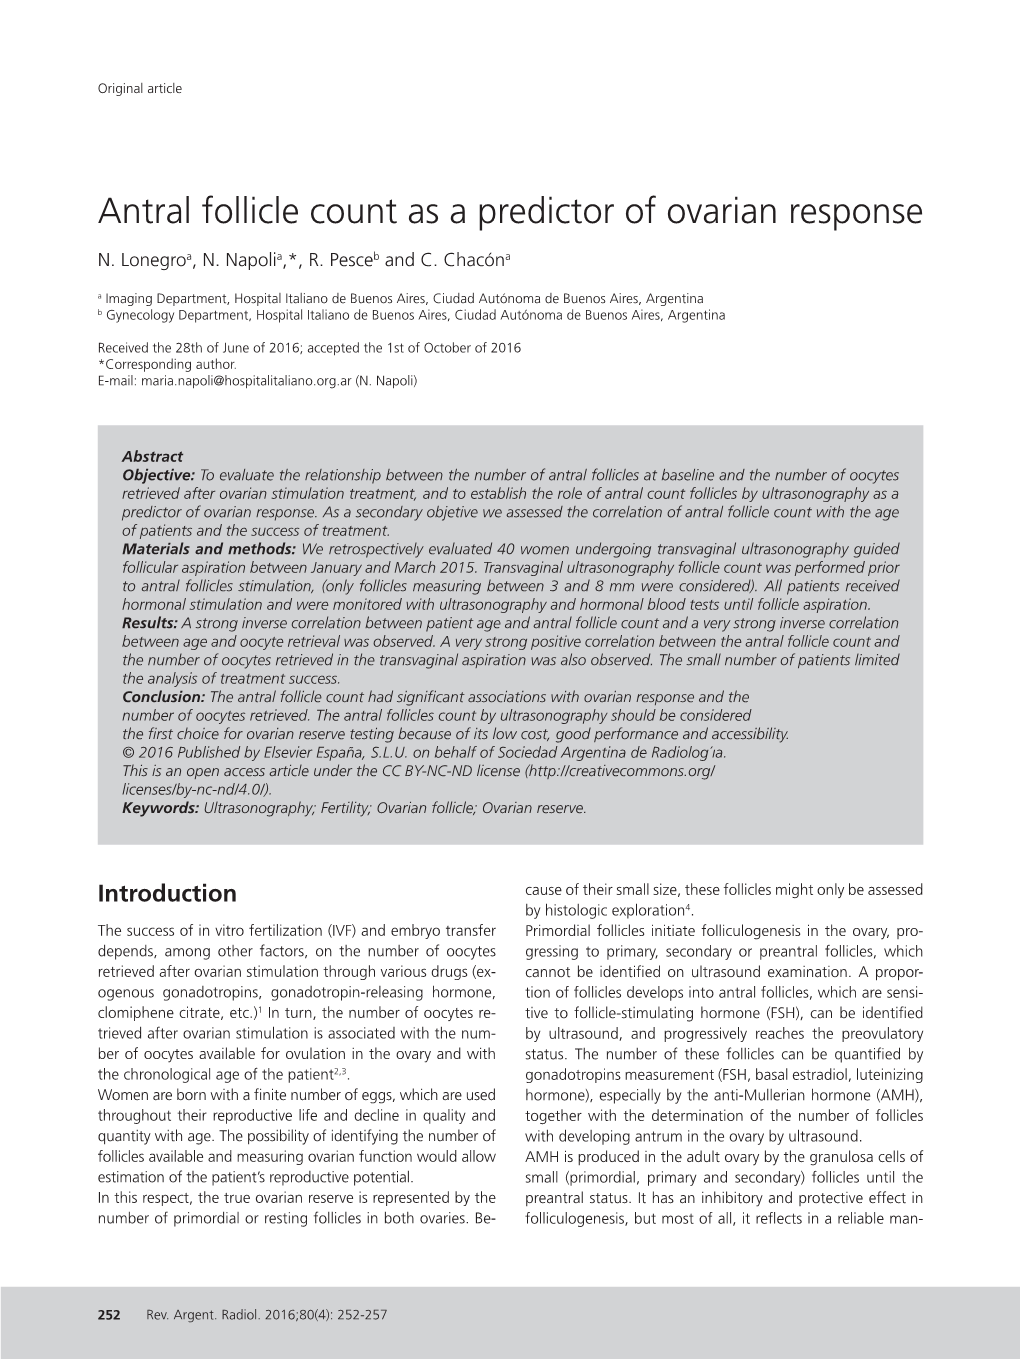 Antral Follicle Count As a Predictor of Ovarian Response